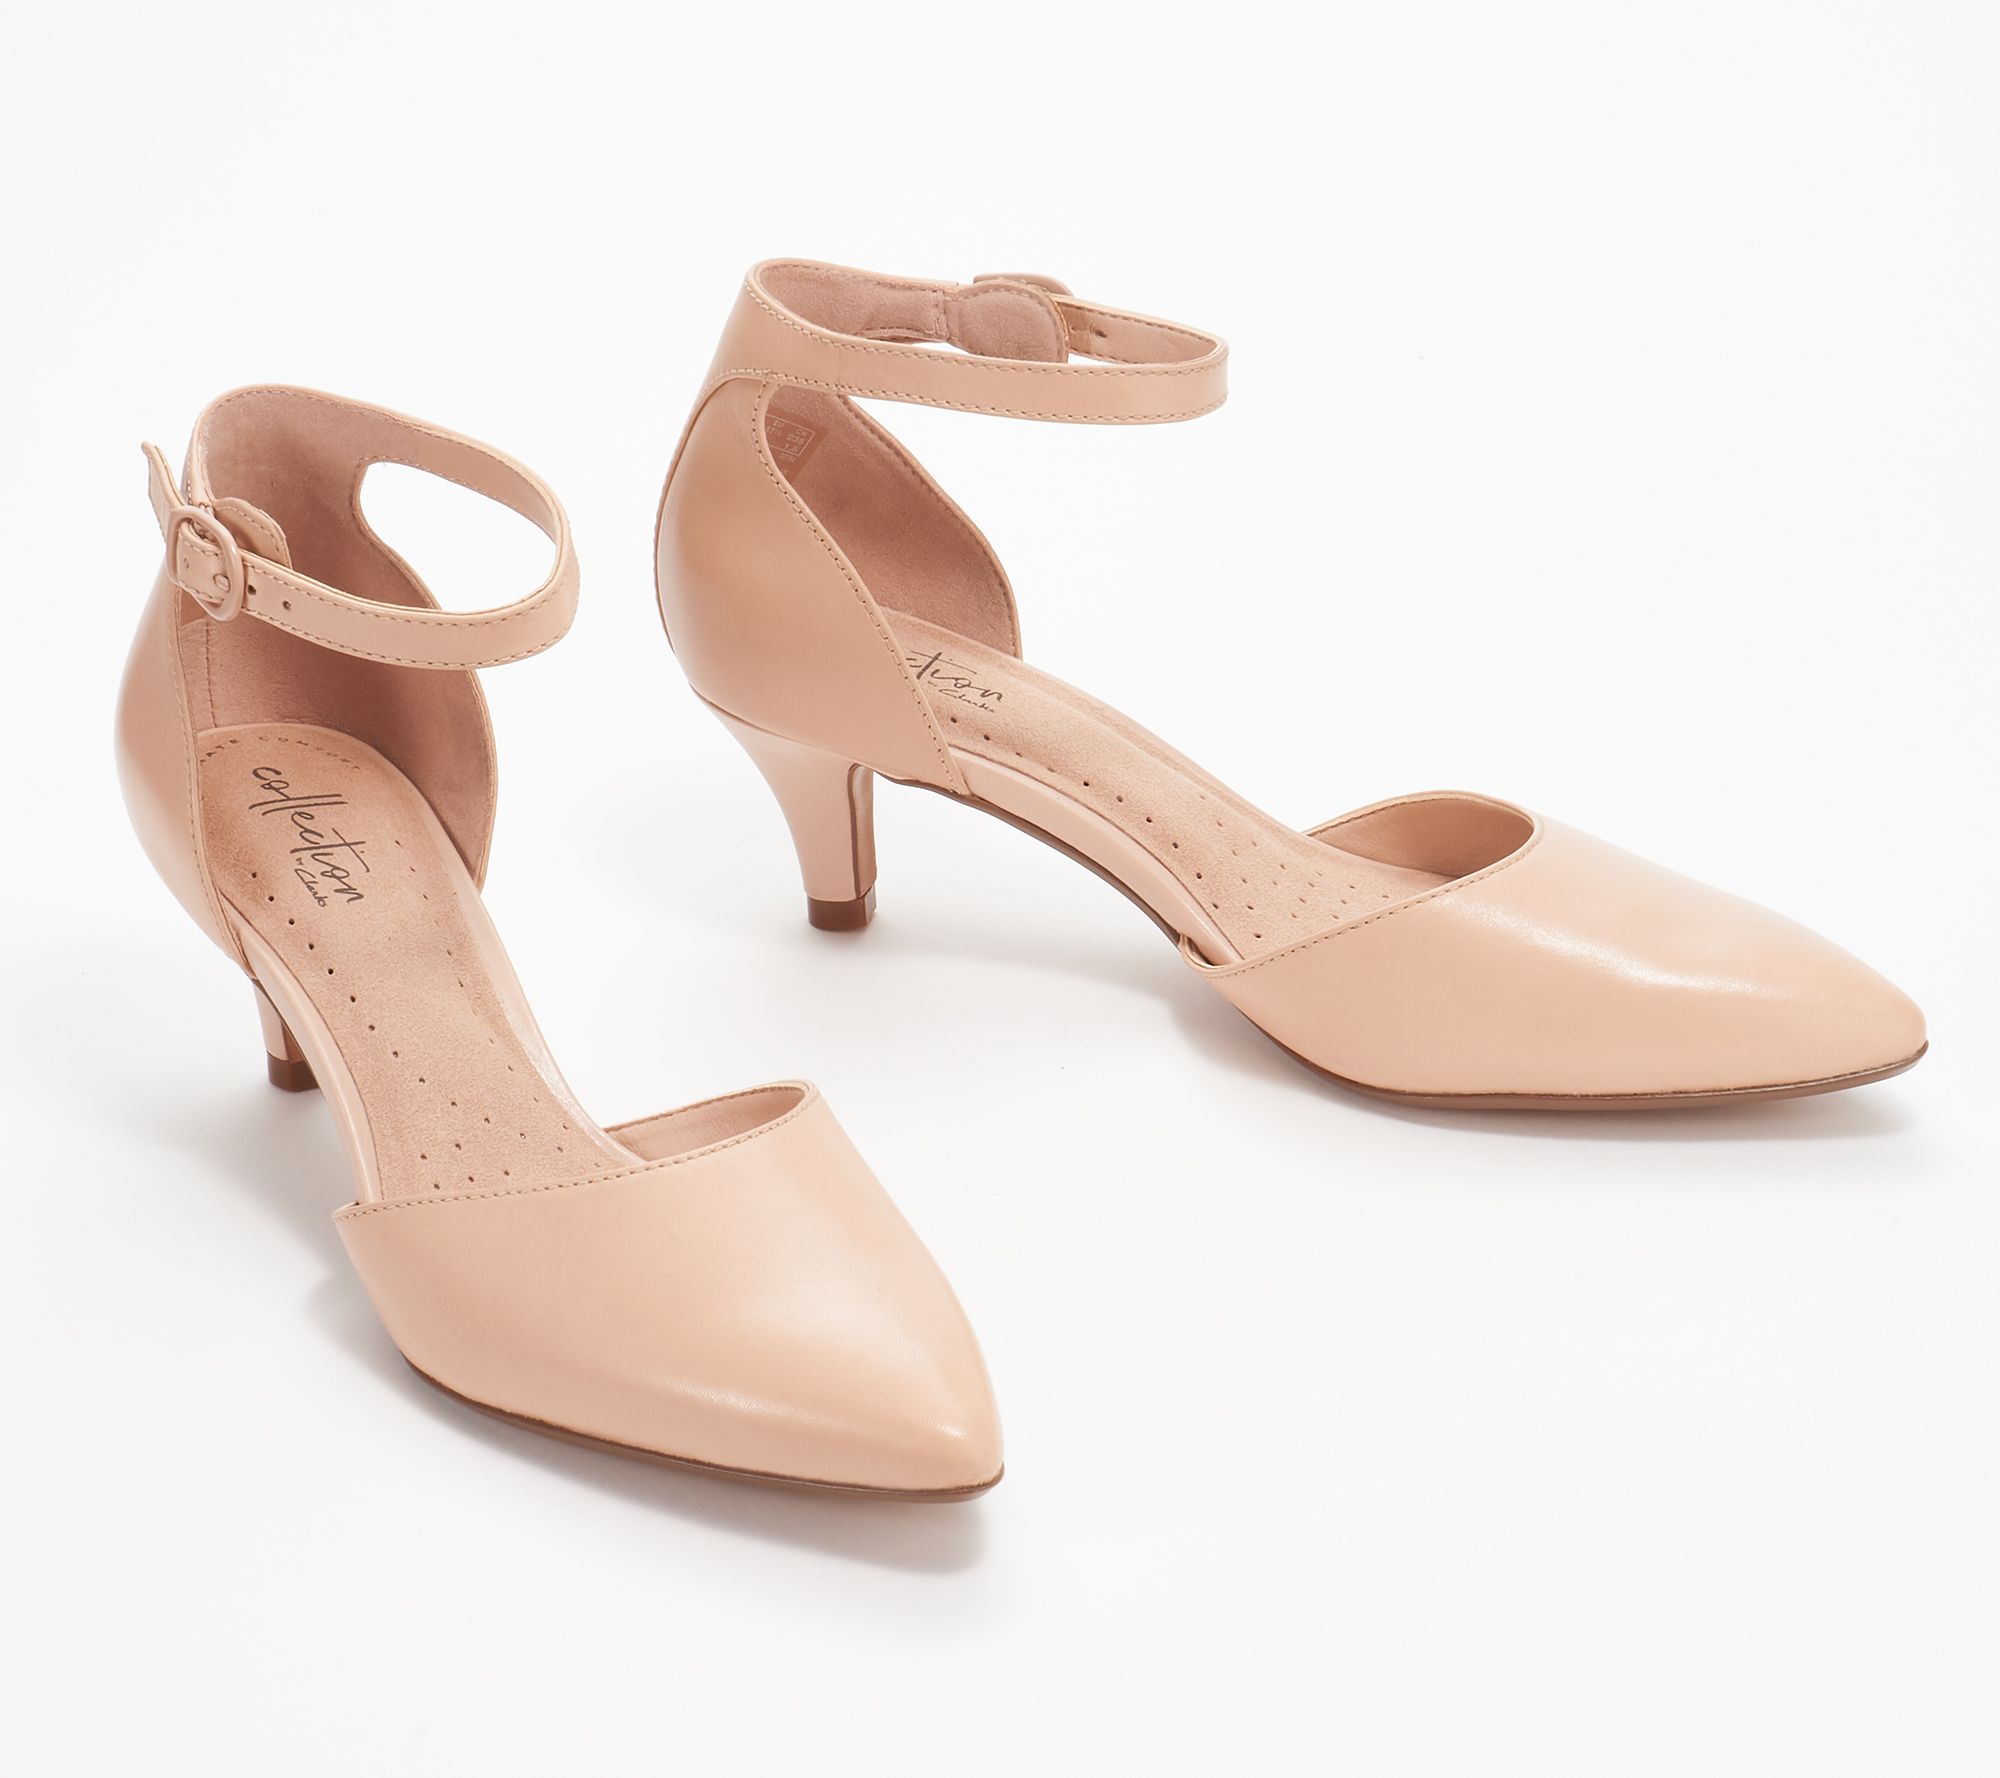 clarks pumps with strap